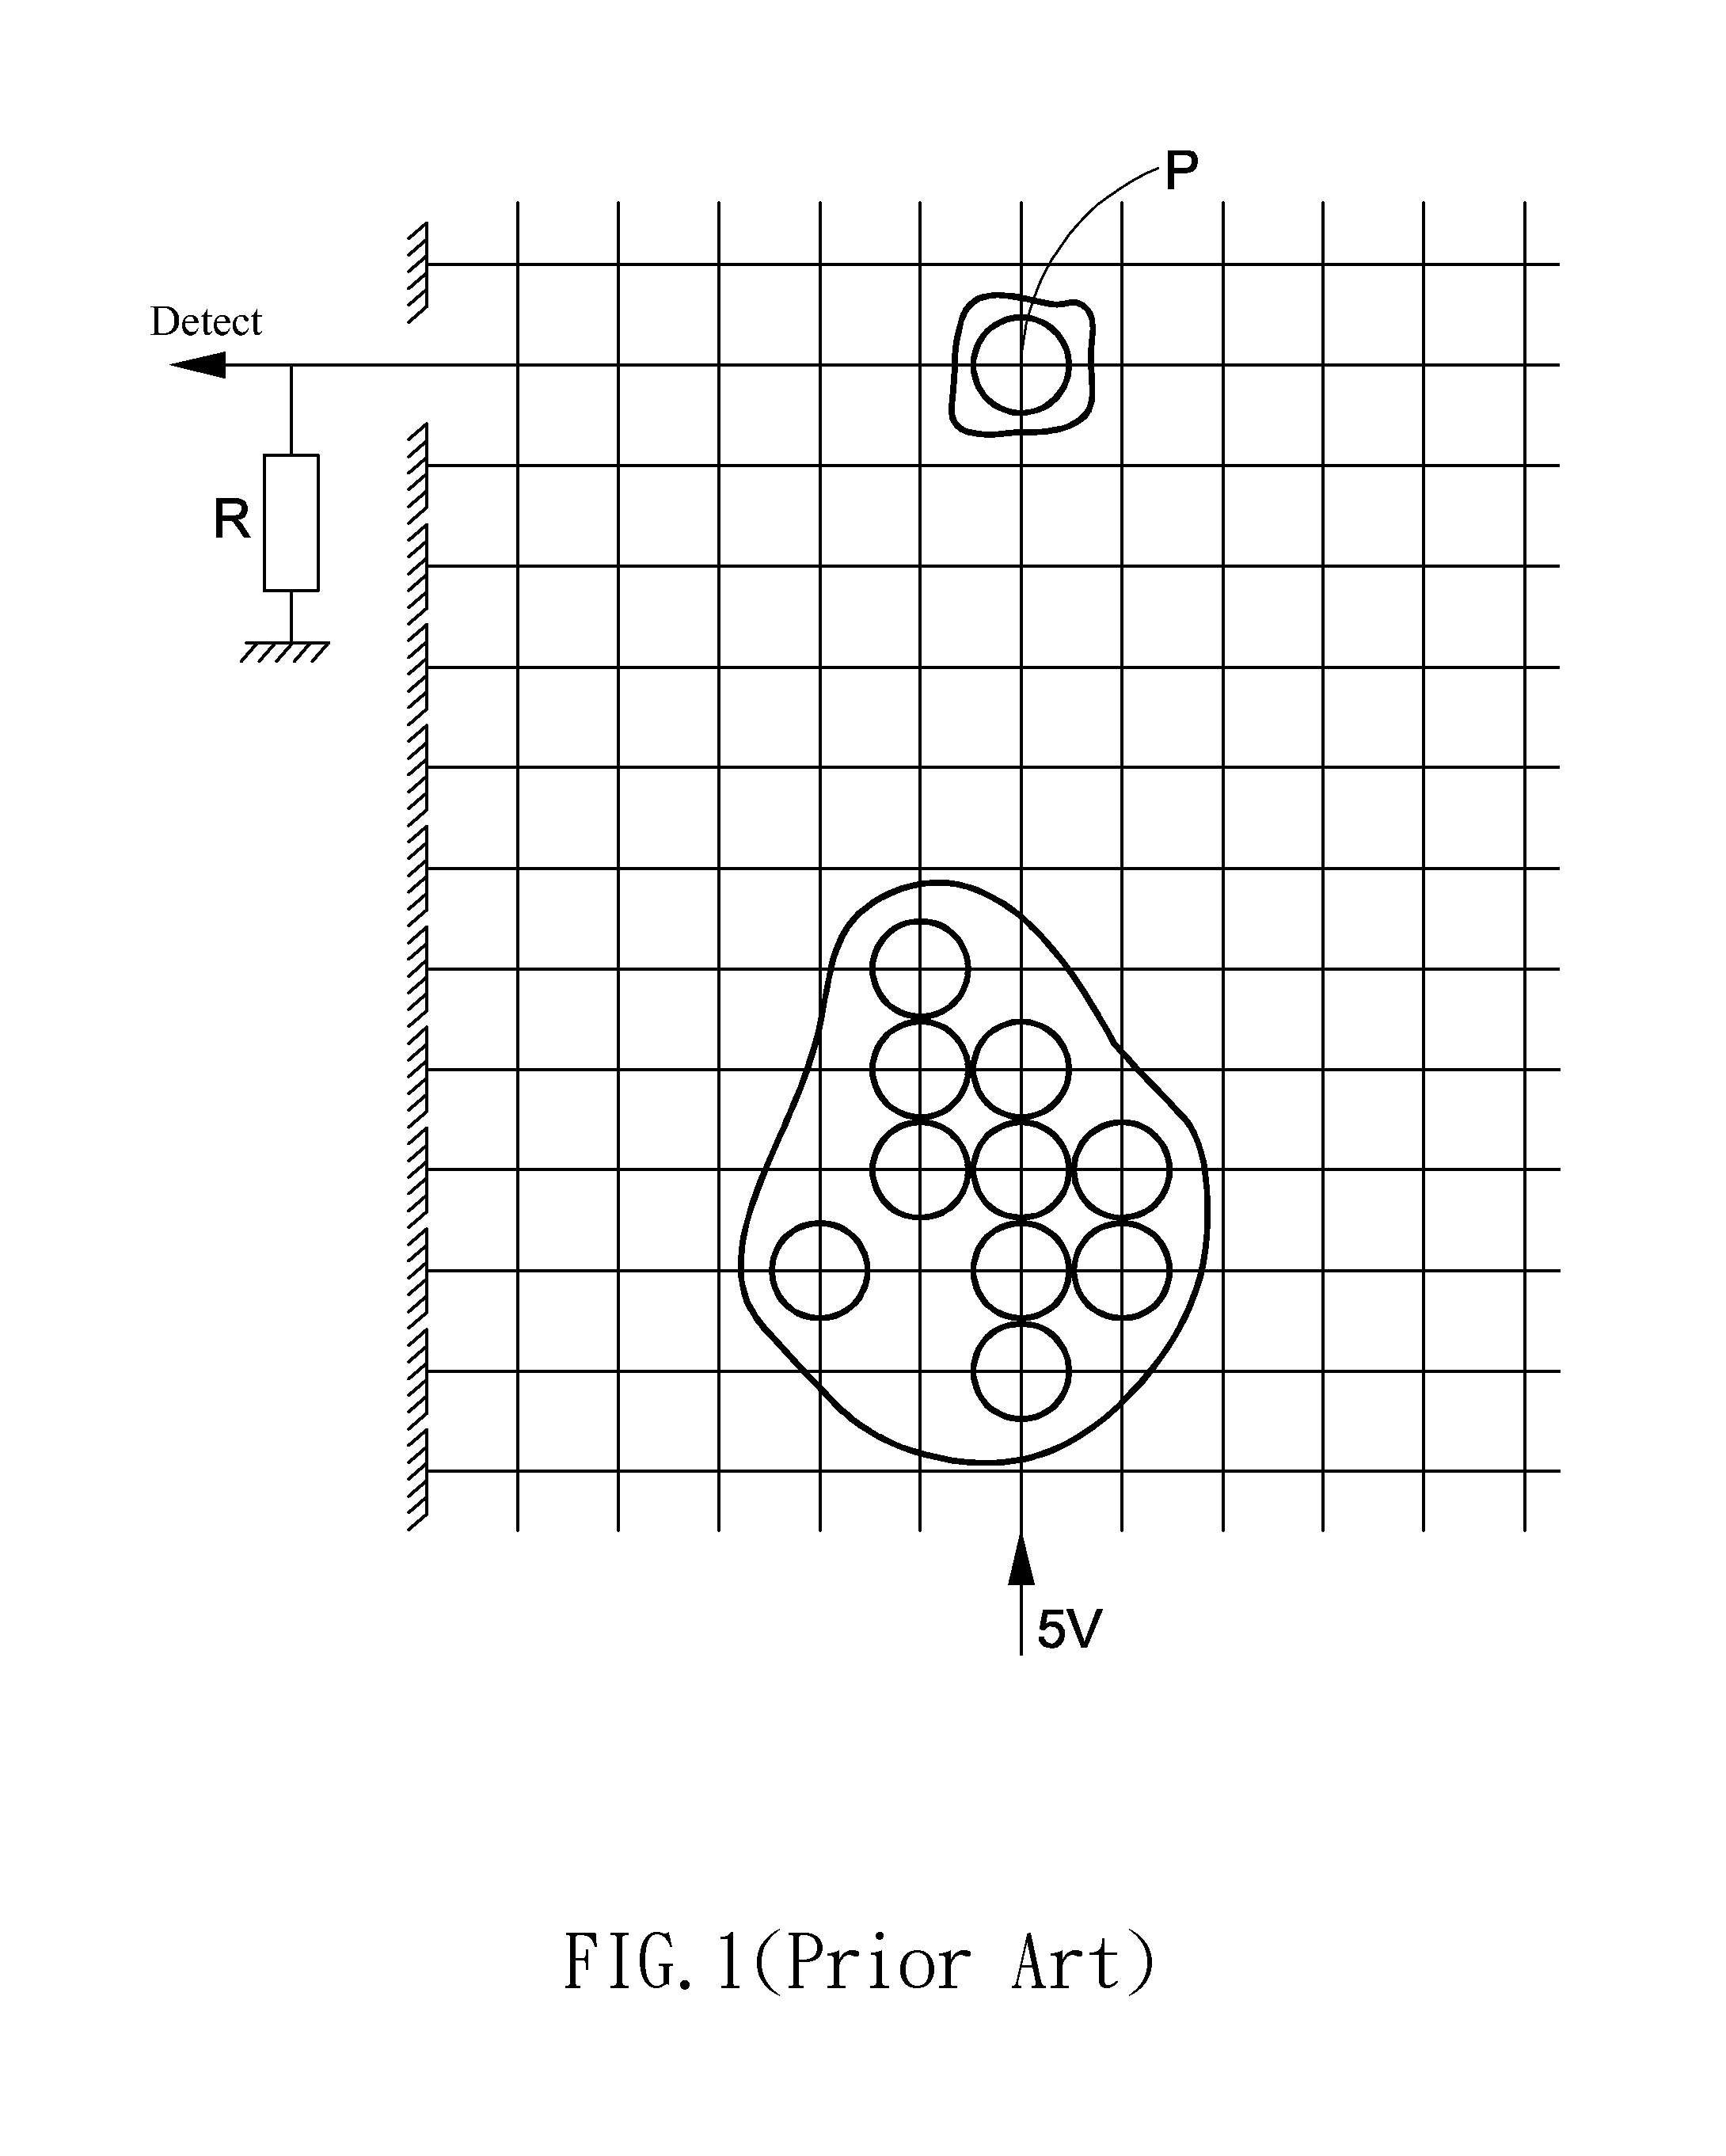 Method and Device for Position Detection with Palm Rejection